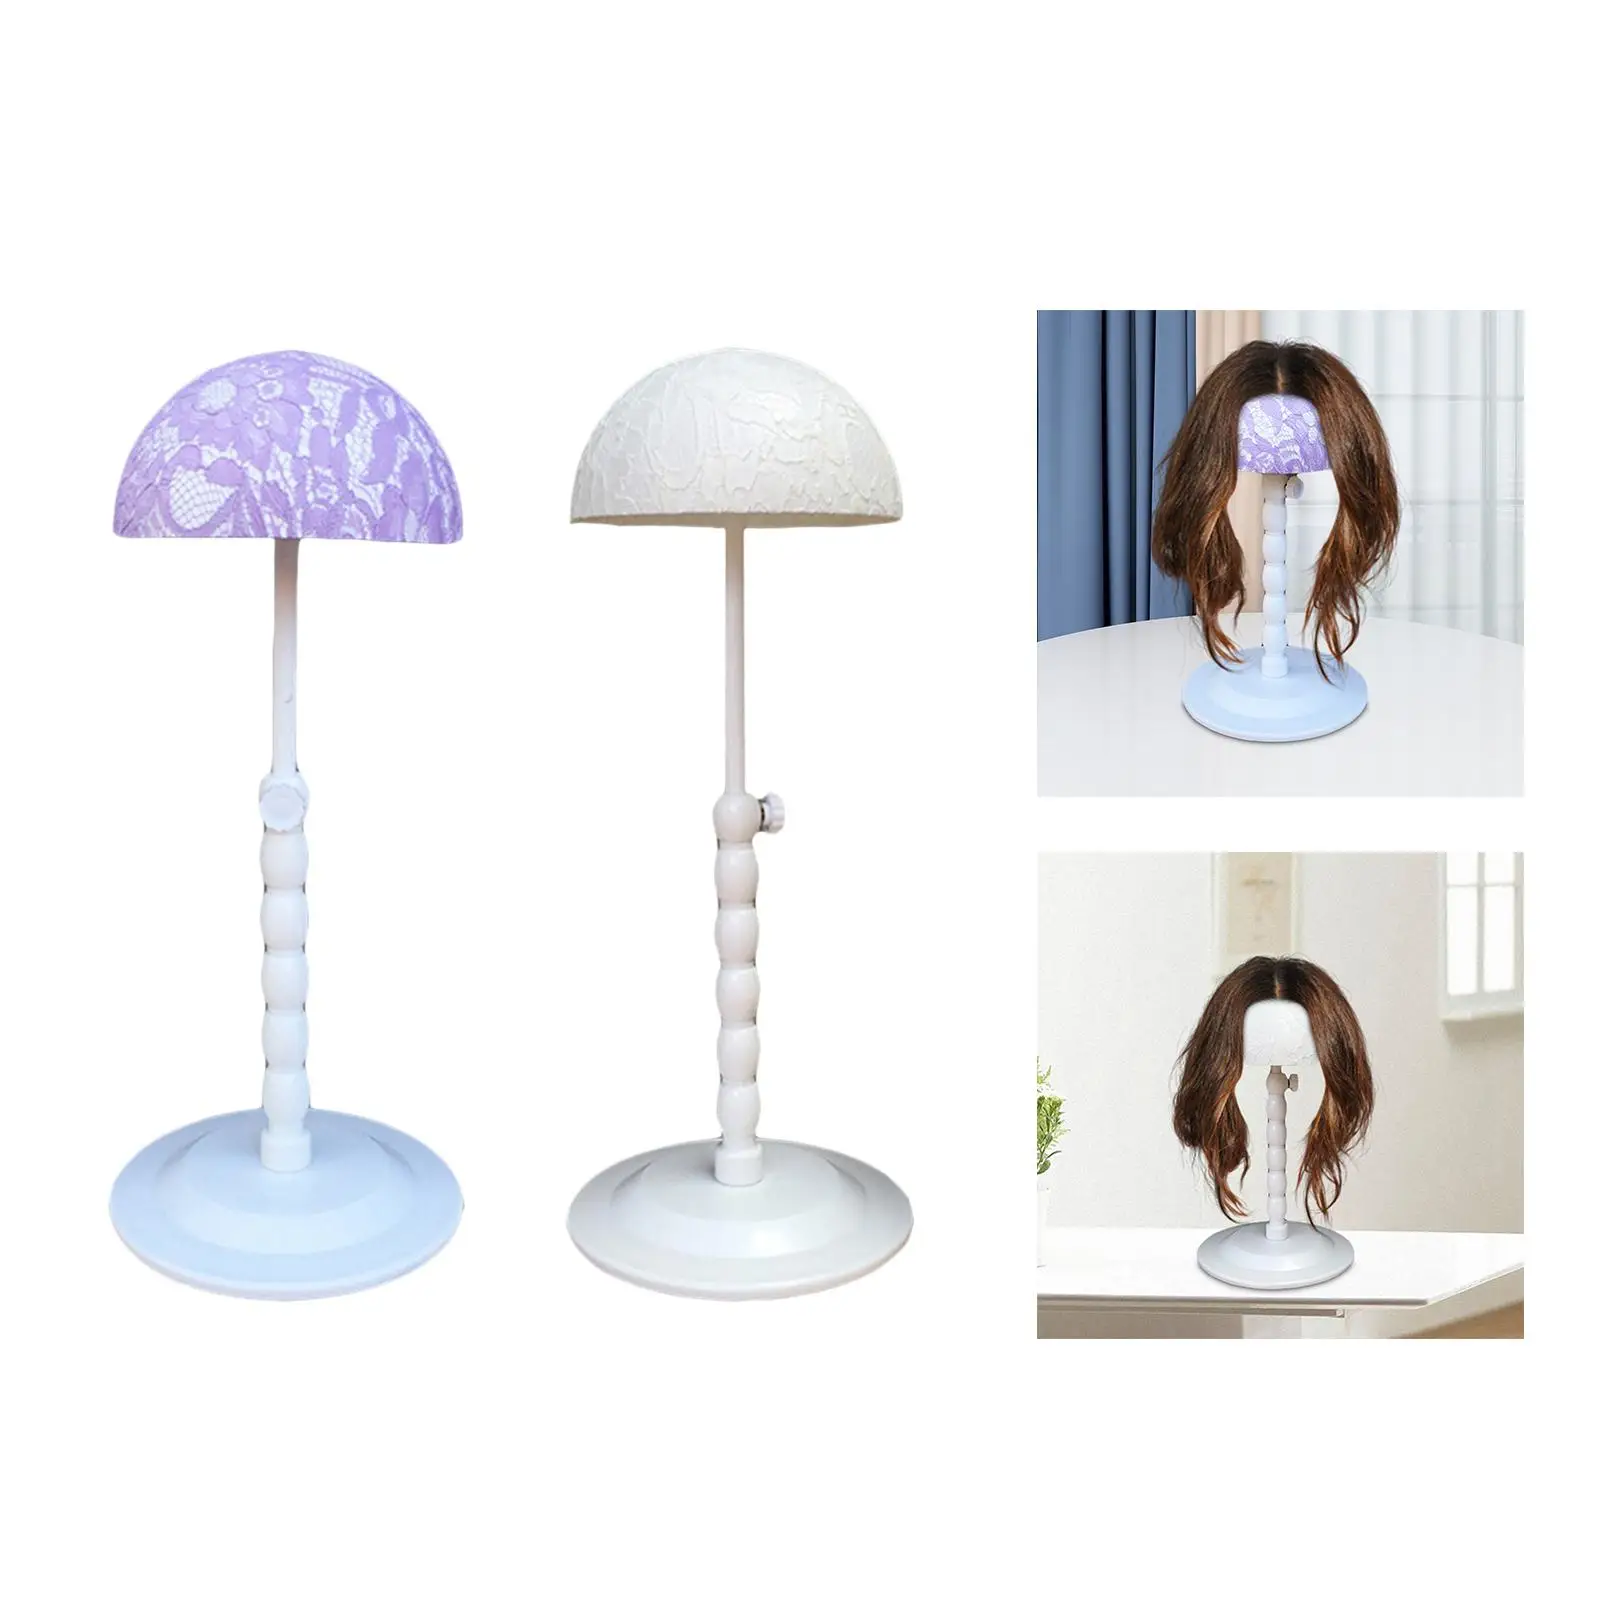 Wig Stand Adjustable Height Hat Display Stand Stable Portable Wig Storage Wig Display Holder for Home Styling Salons Drying Shop